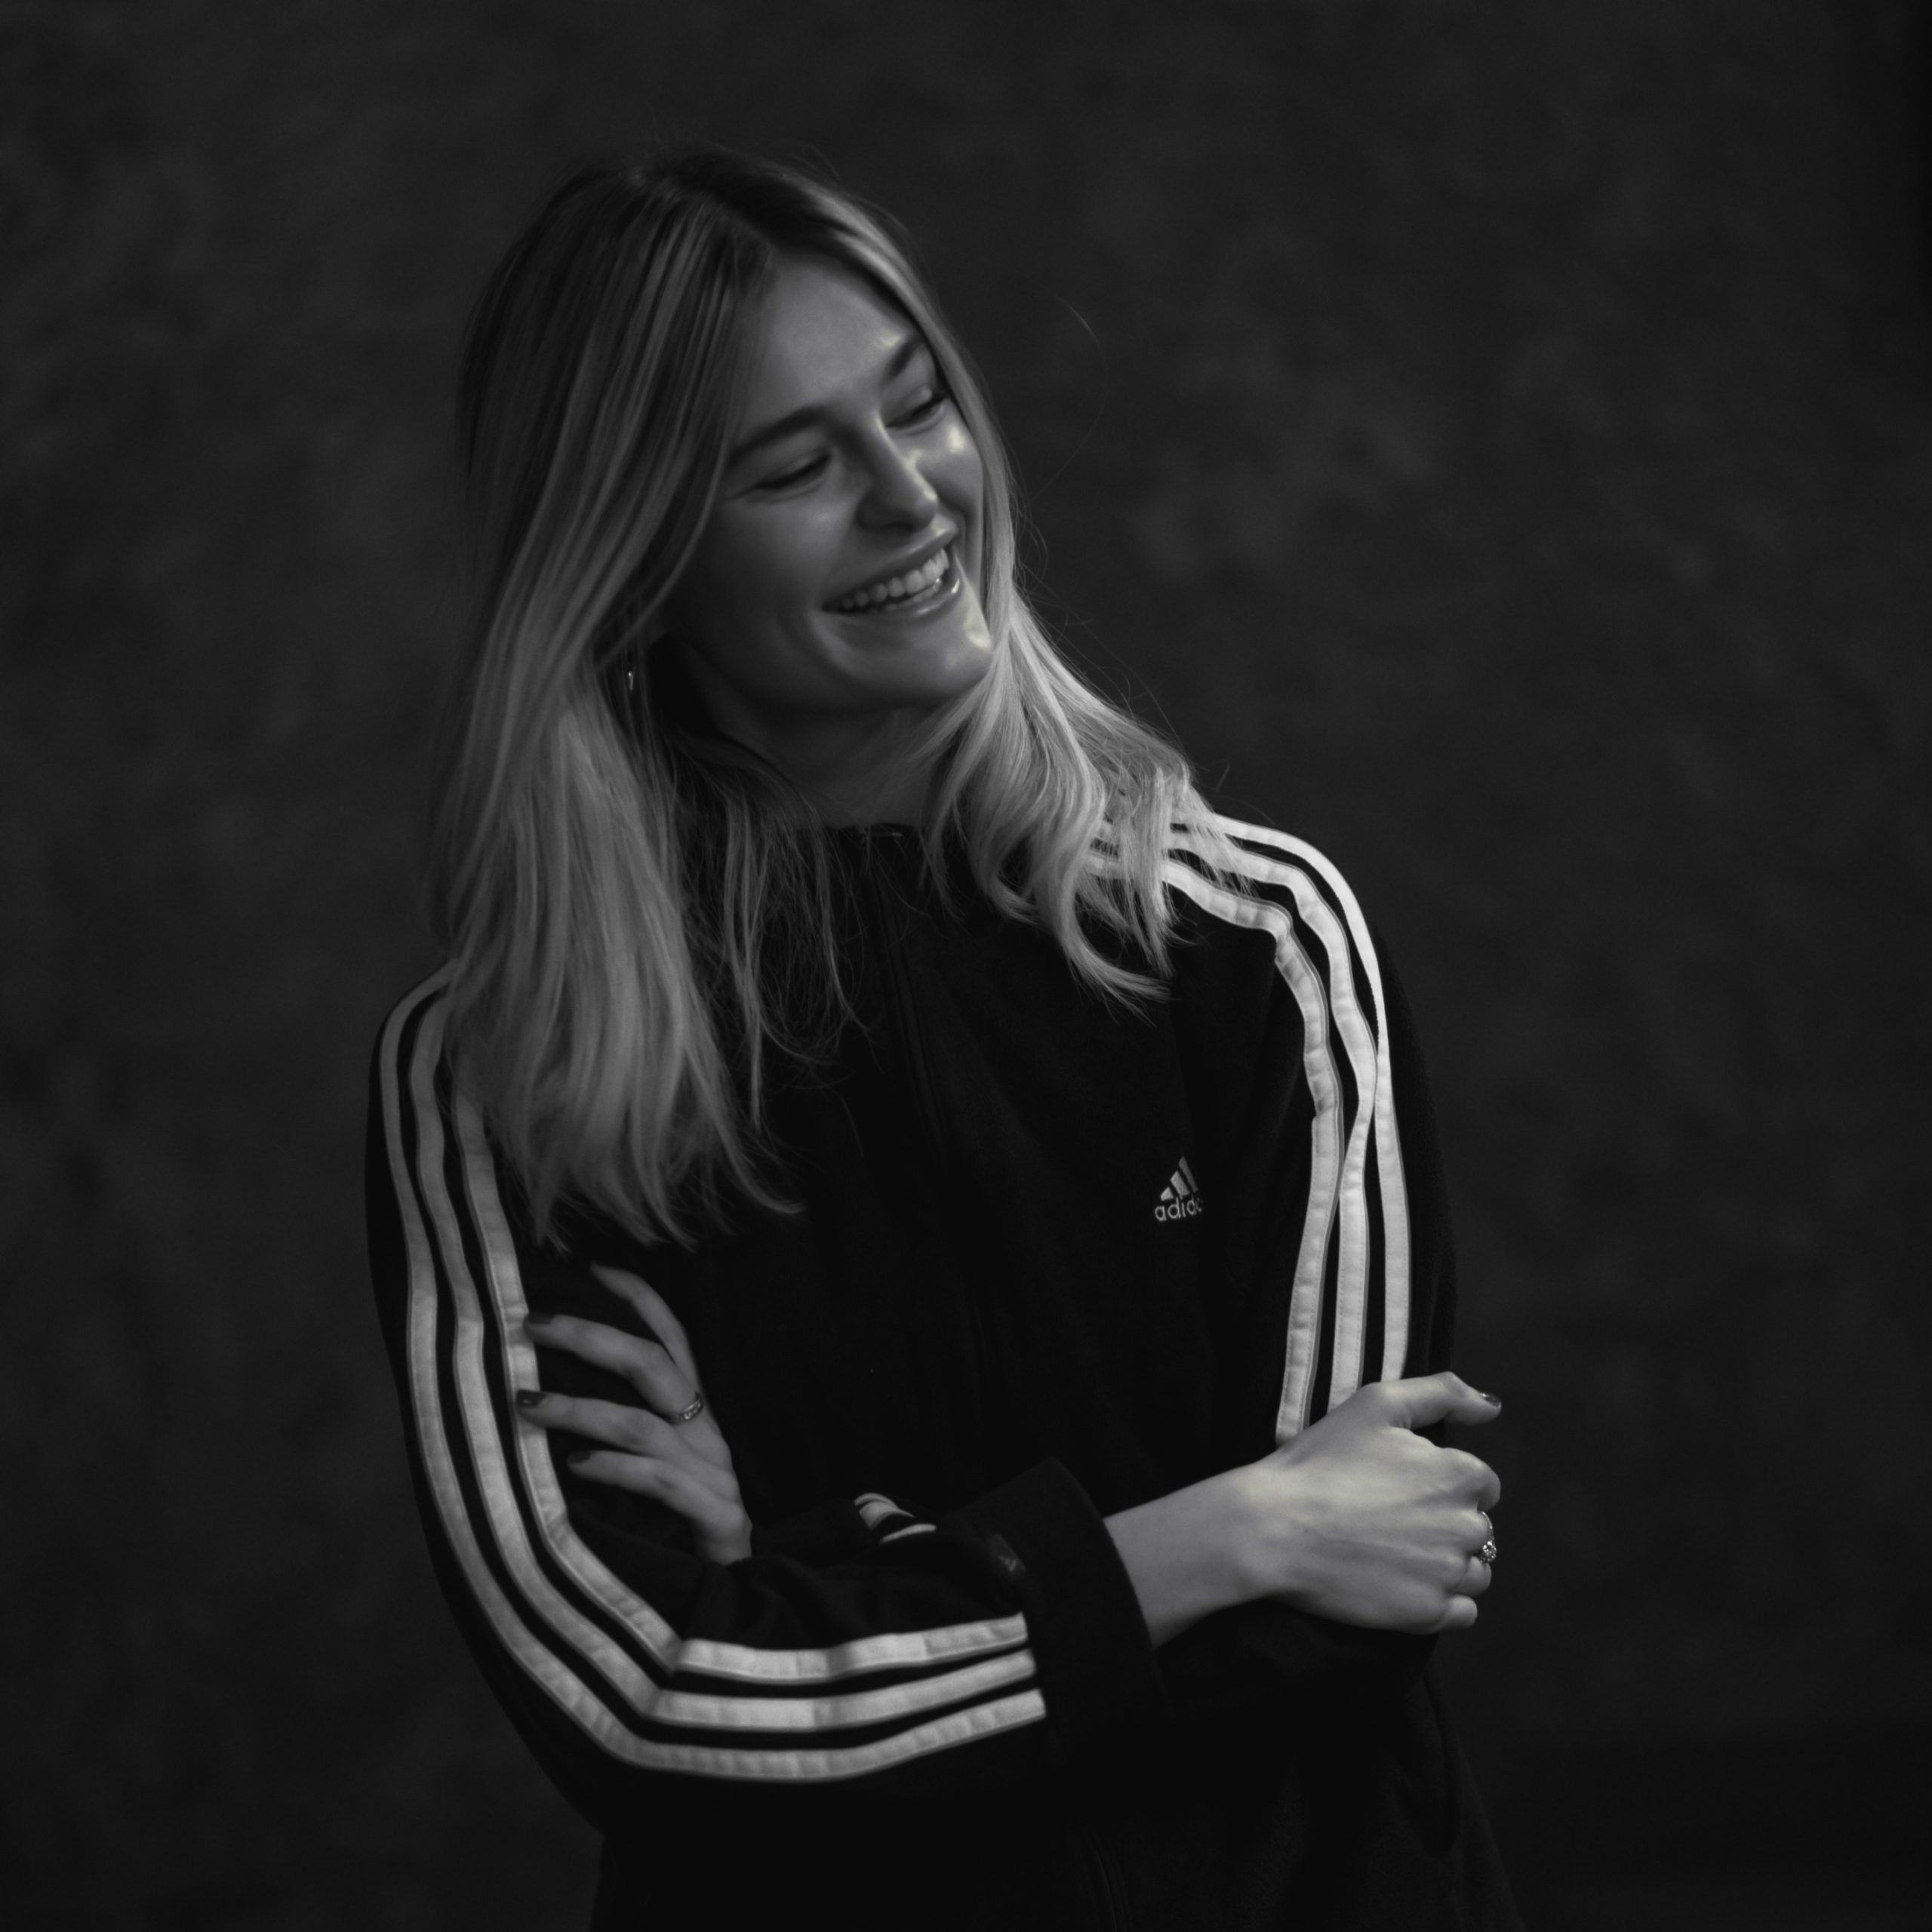 Portrait photograph of new Northern Visuals Employee, Elizabeth Wright laughing at work - black background. Liz is wearing an Adidas top.